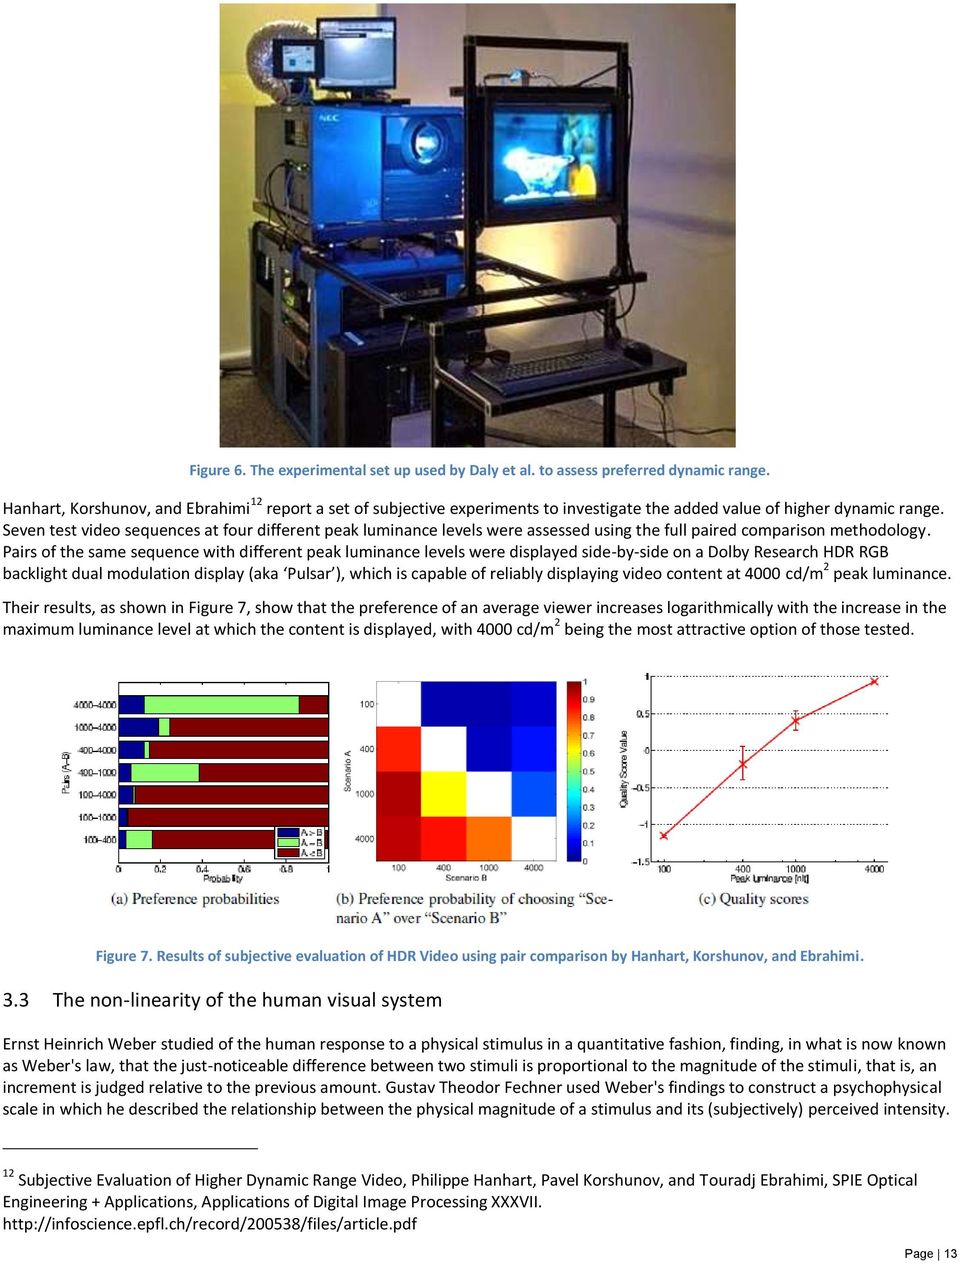 Seven test video sequences at four different peak luminance levels were assessed using the full paired comparison methodology.